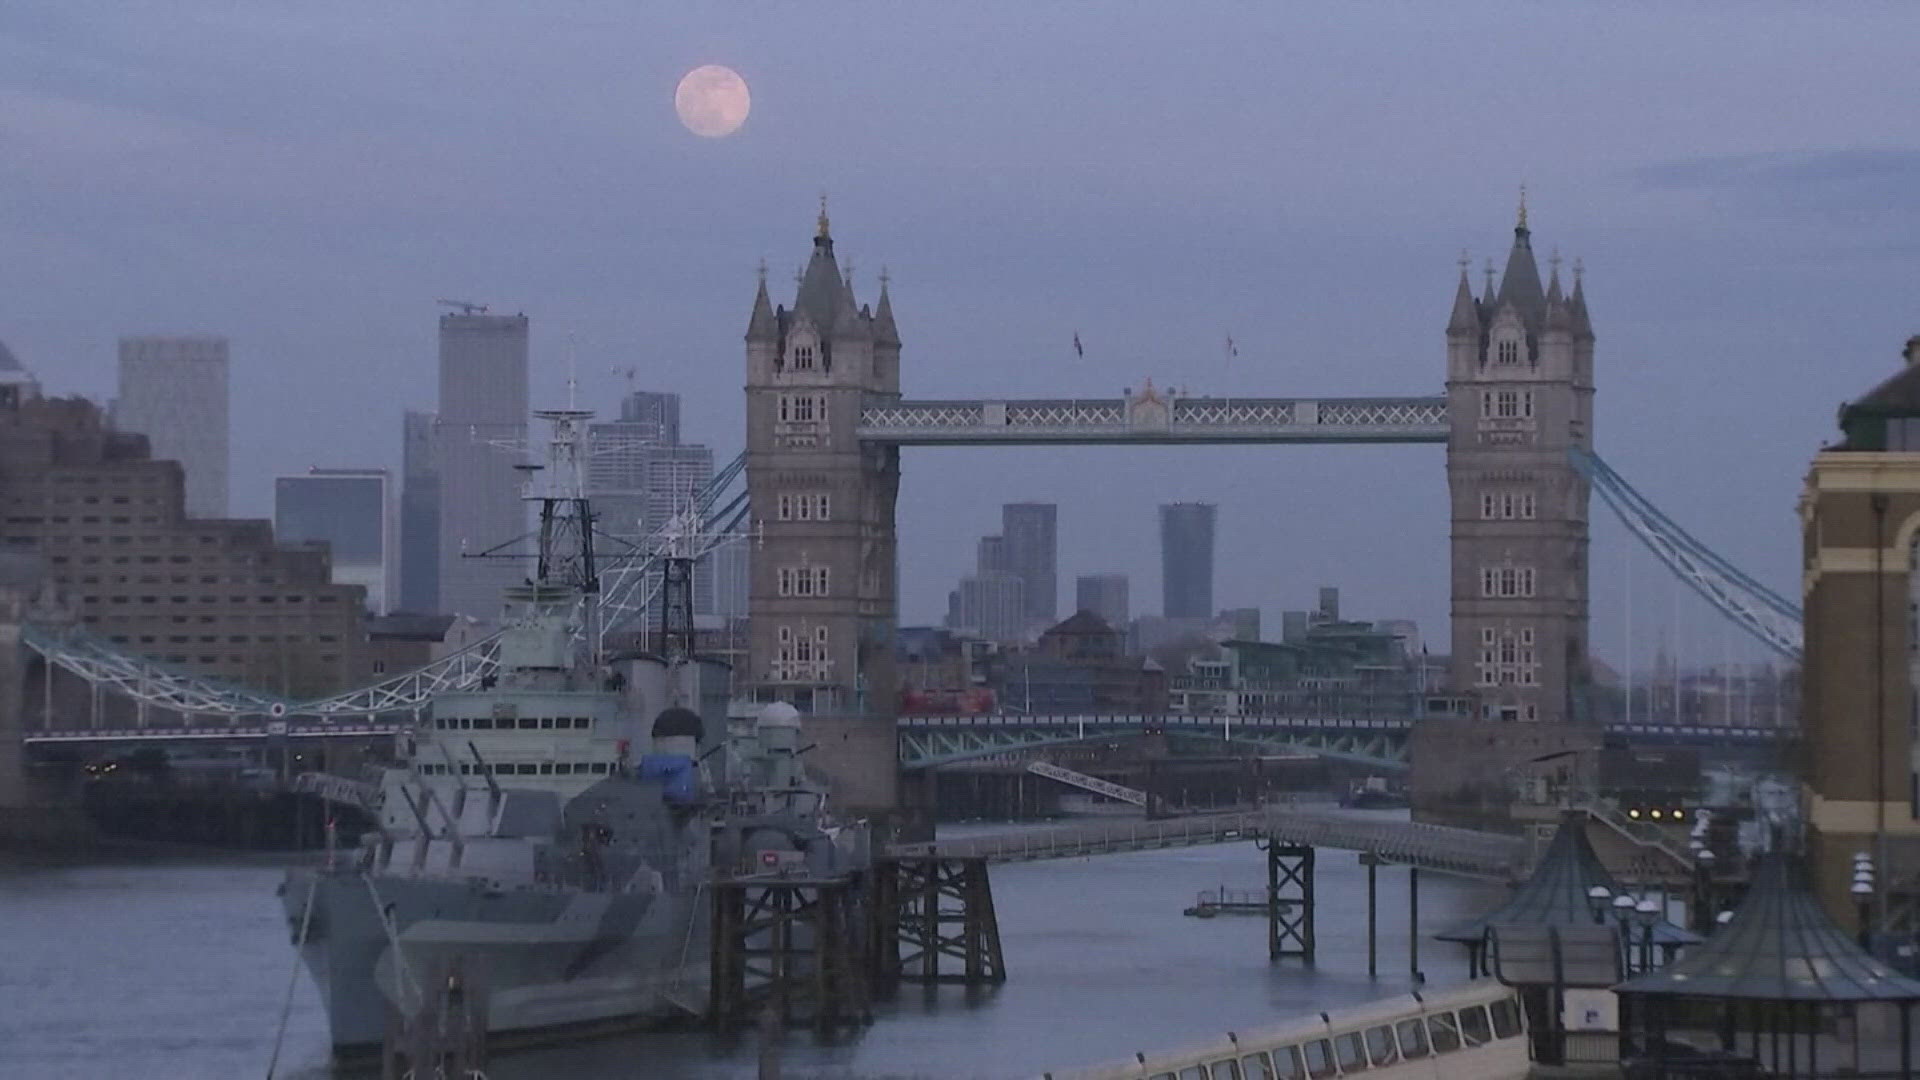 Despite the name, Tuesday's full moon won't be a rosy pink color.